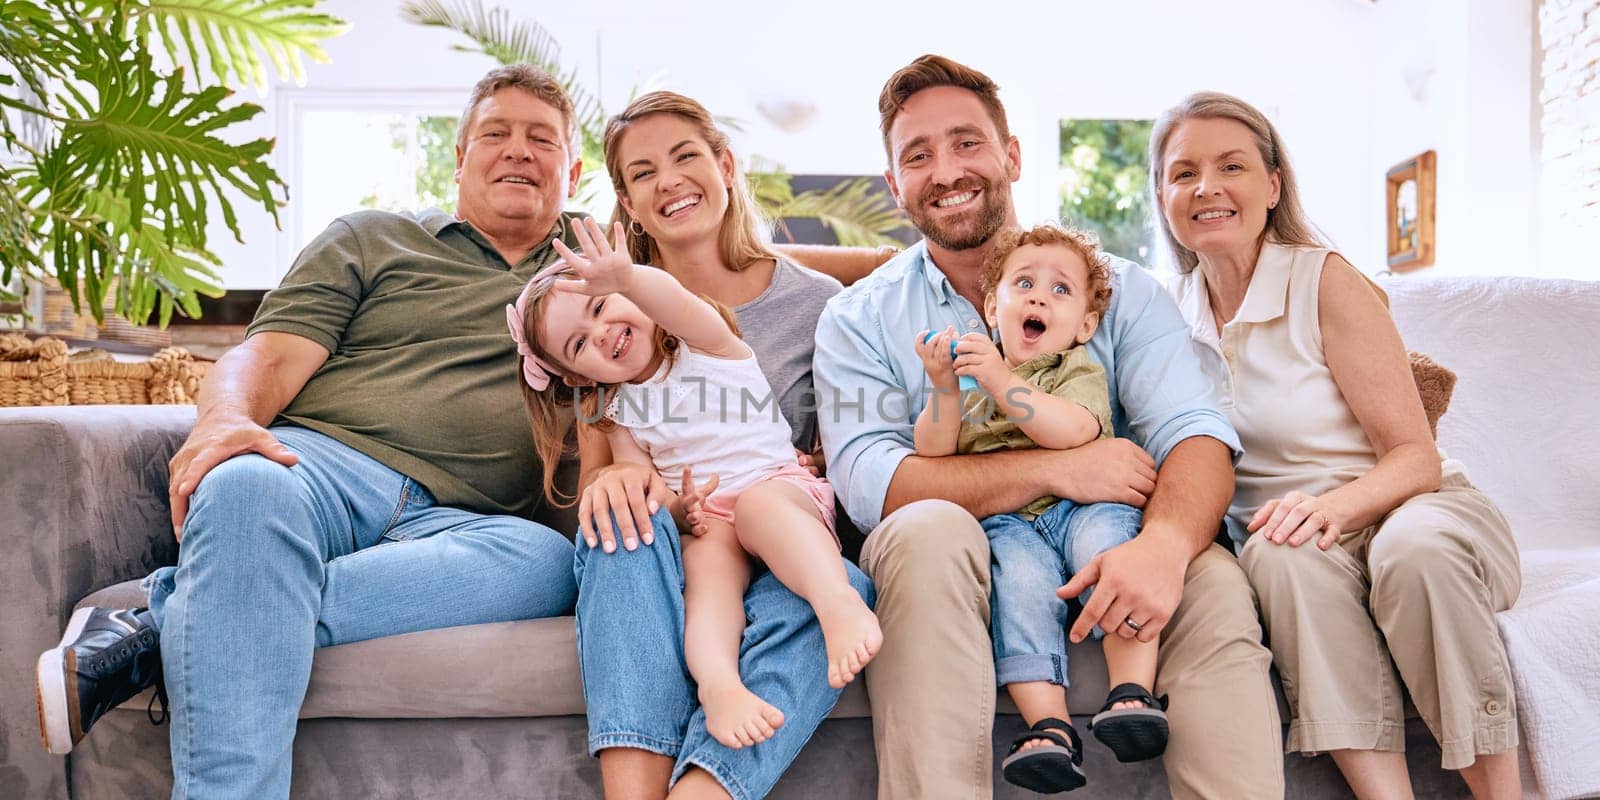 Happy family with kids, parents and grandparents on sofa with smile in living room. Happiness, family and generations of men, women and children spending time in home together making happy memories